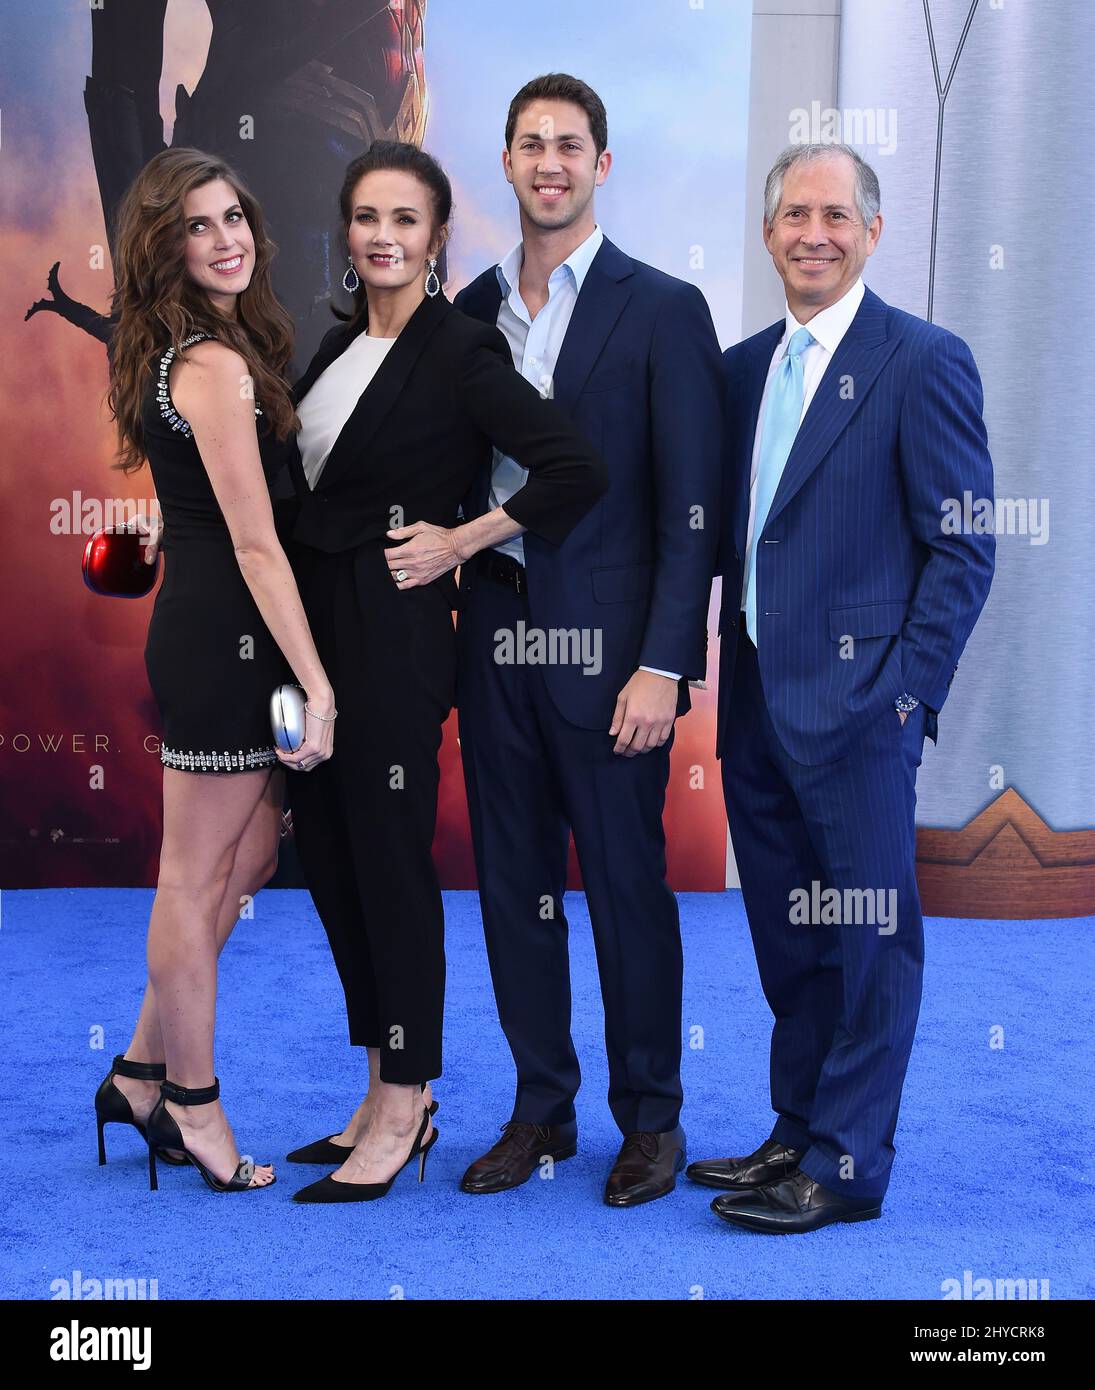 Lynda Carter, Jessica Altman, James Altman and Robert Altman attending the premiere of Wonder Woman, held at the Pantages Theatre in Los Angeles, California Stock Photo